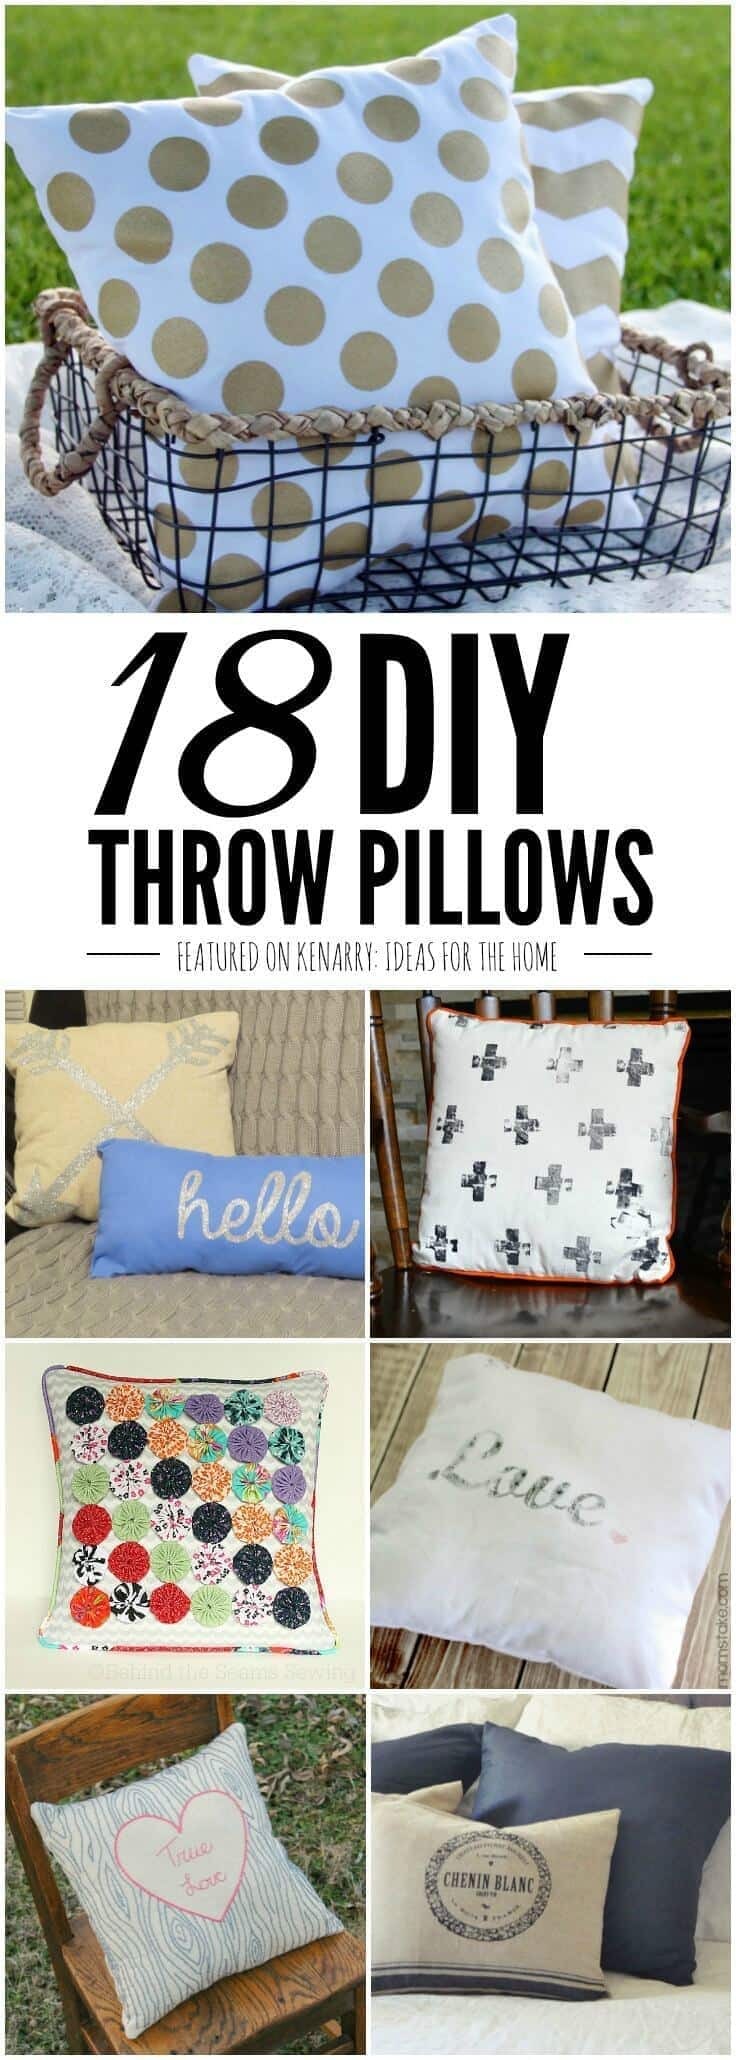 You'd be surprised how easy it is to make your own pillows with these 18 DIY Throw Pillow tutorials. Ideas include both no-sew and easy sewing ideas that anyone can do to make their home beautiful. Throw pillows add style, comfort and texture to any room in the home, especially bedrooms, living rooms and even outdoor spaces.